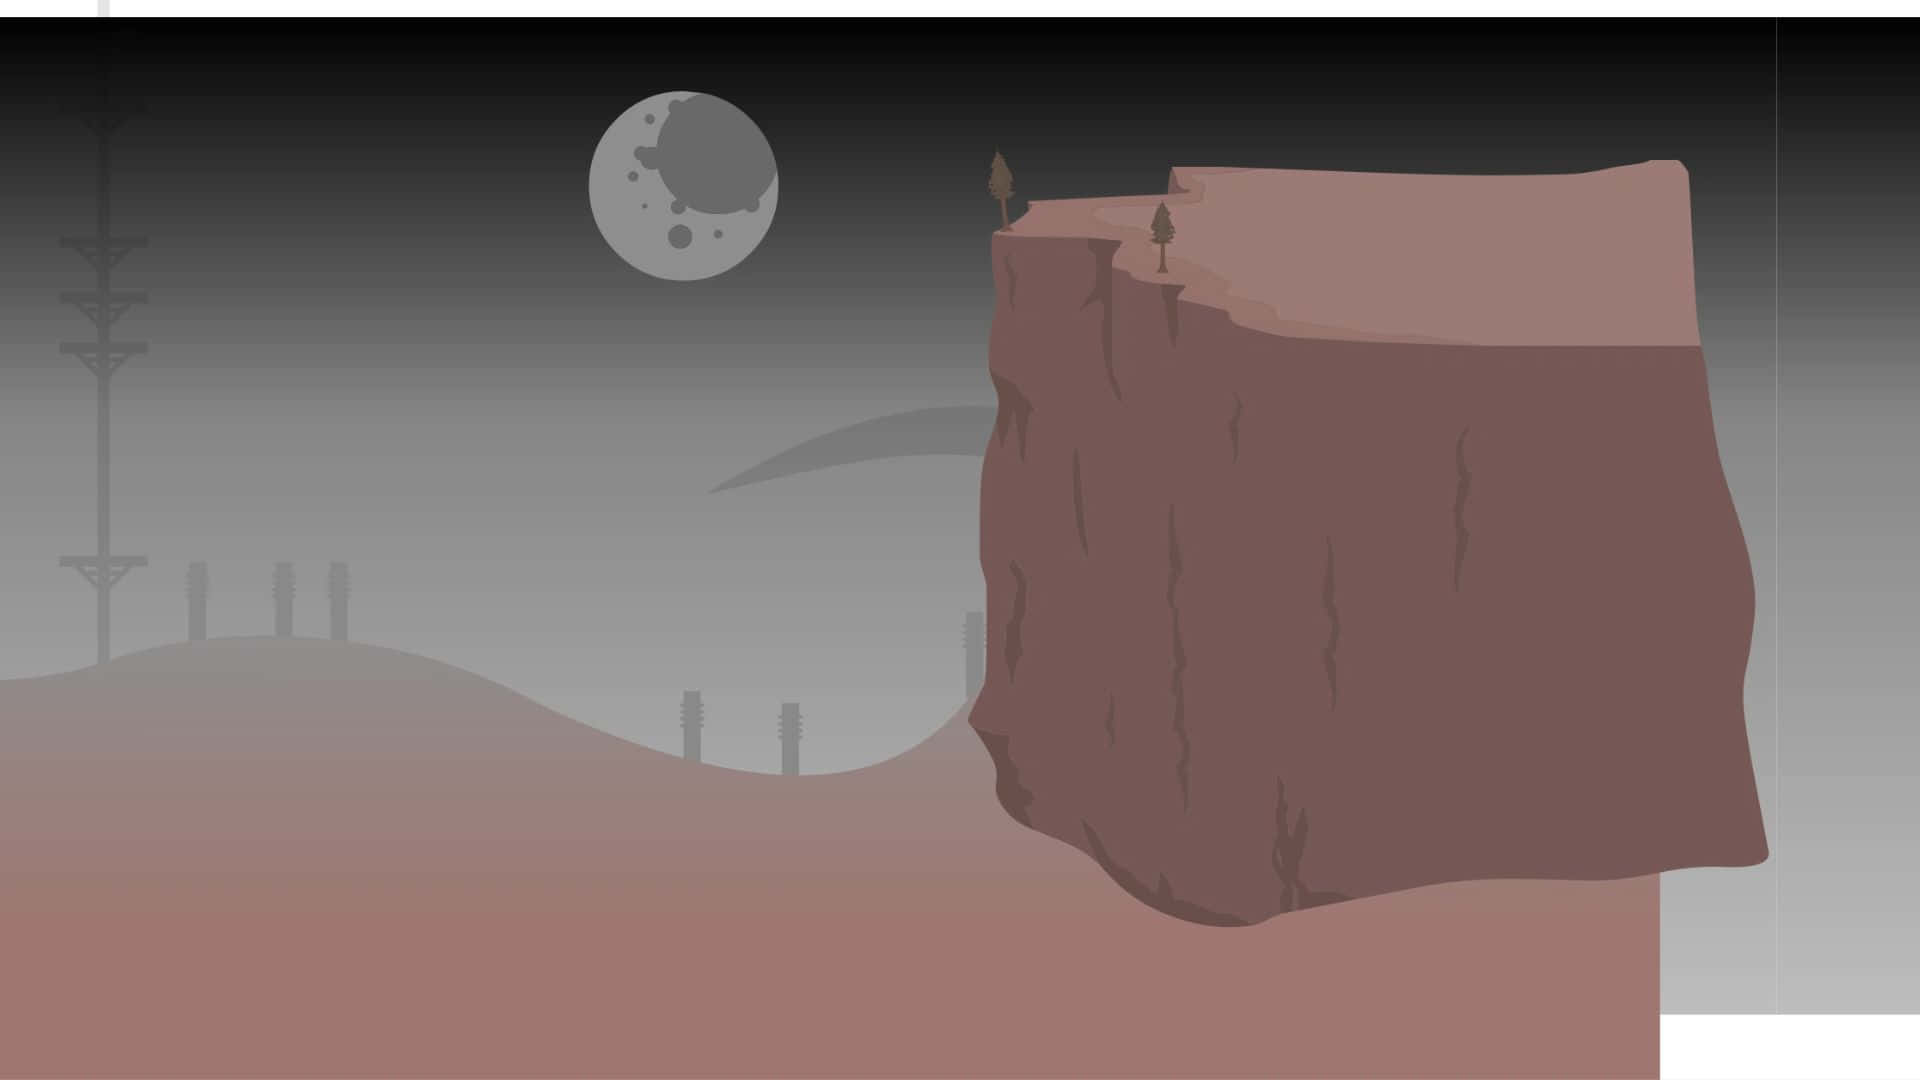 A Cliff With A Moon And A Tree